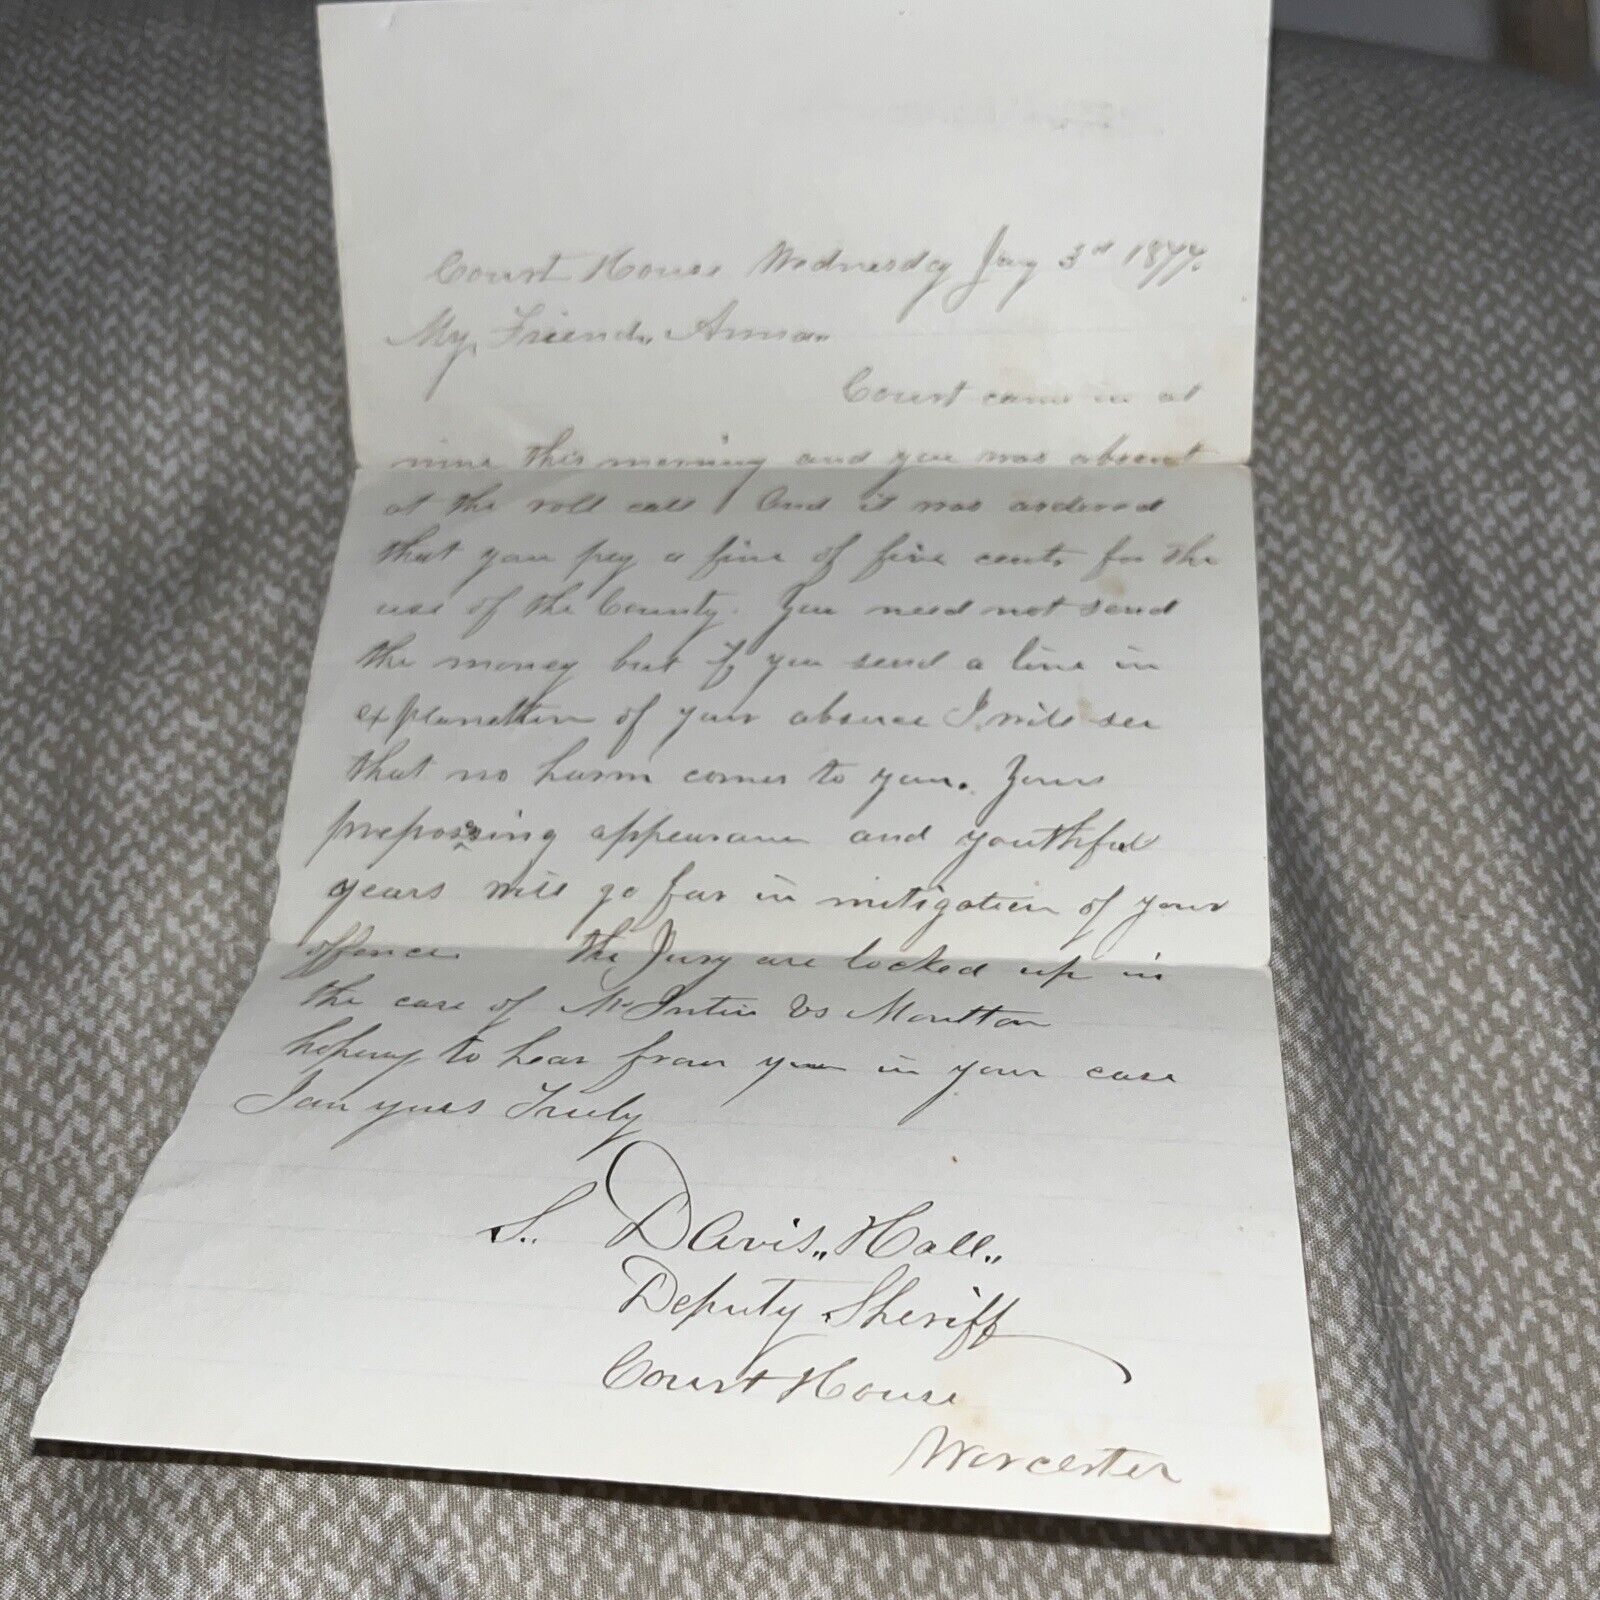 Antique 1877 Letter from Worcester Court Courthouse Deputy Sheriff - 5 Cent Fine